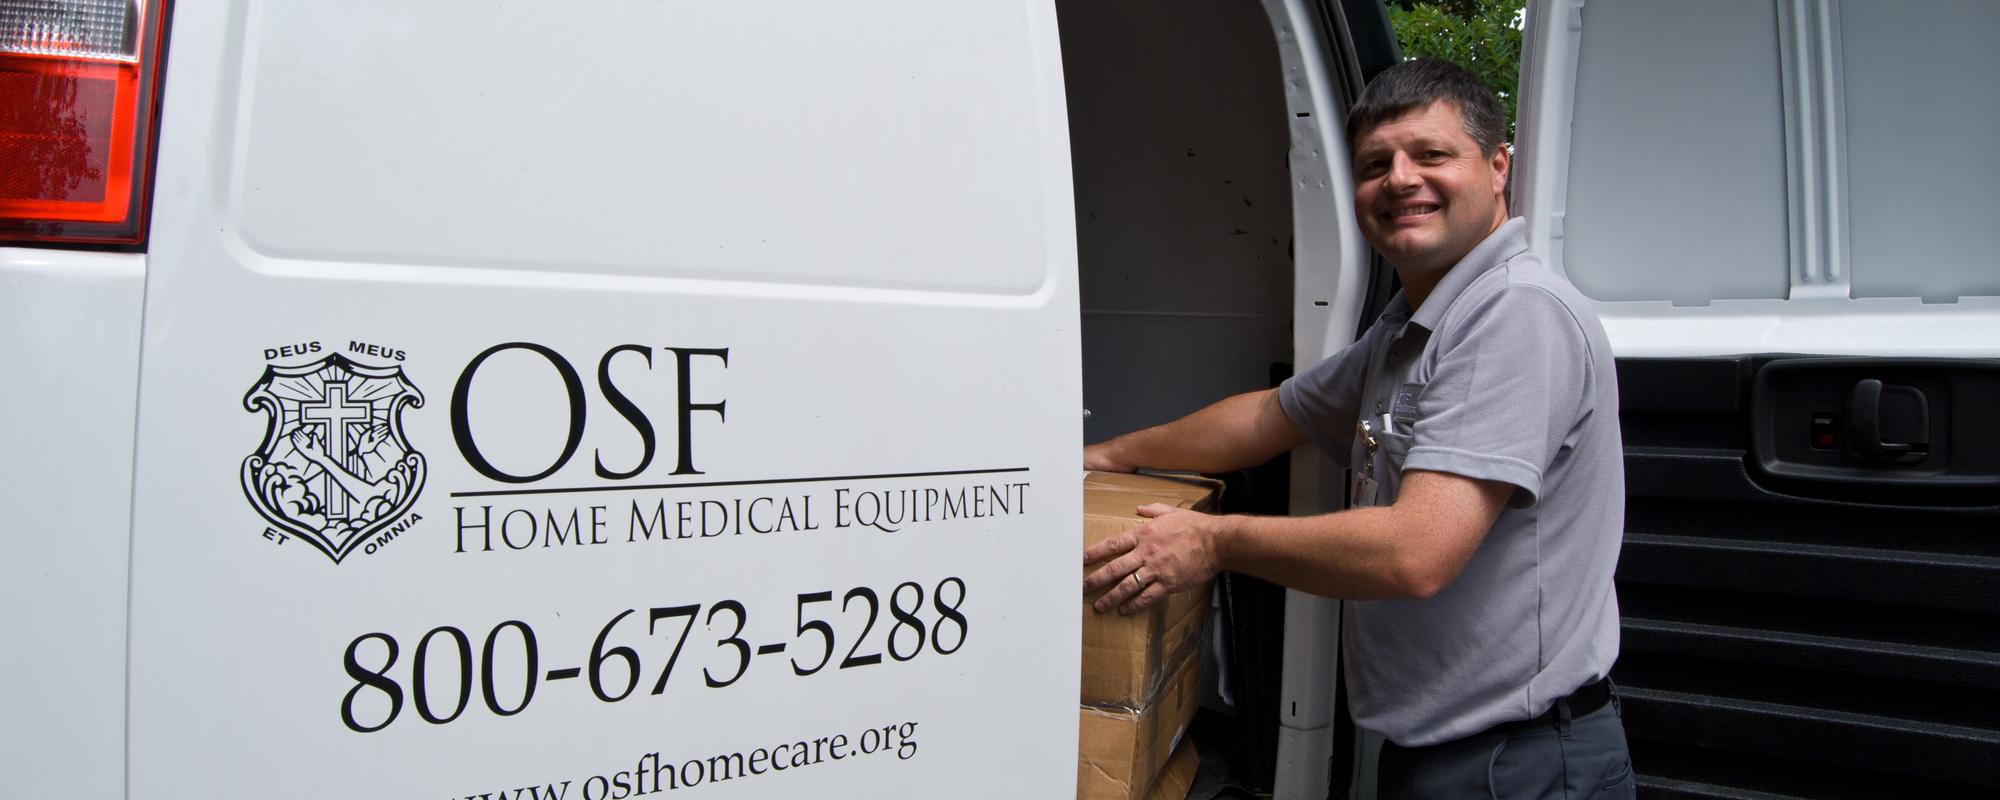 OSF Home Medical Equipment Delivery Van.jpg